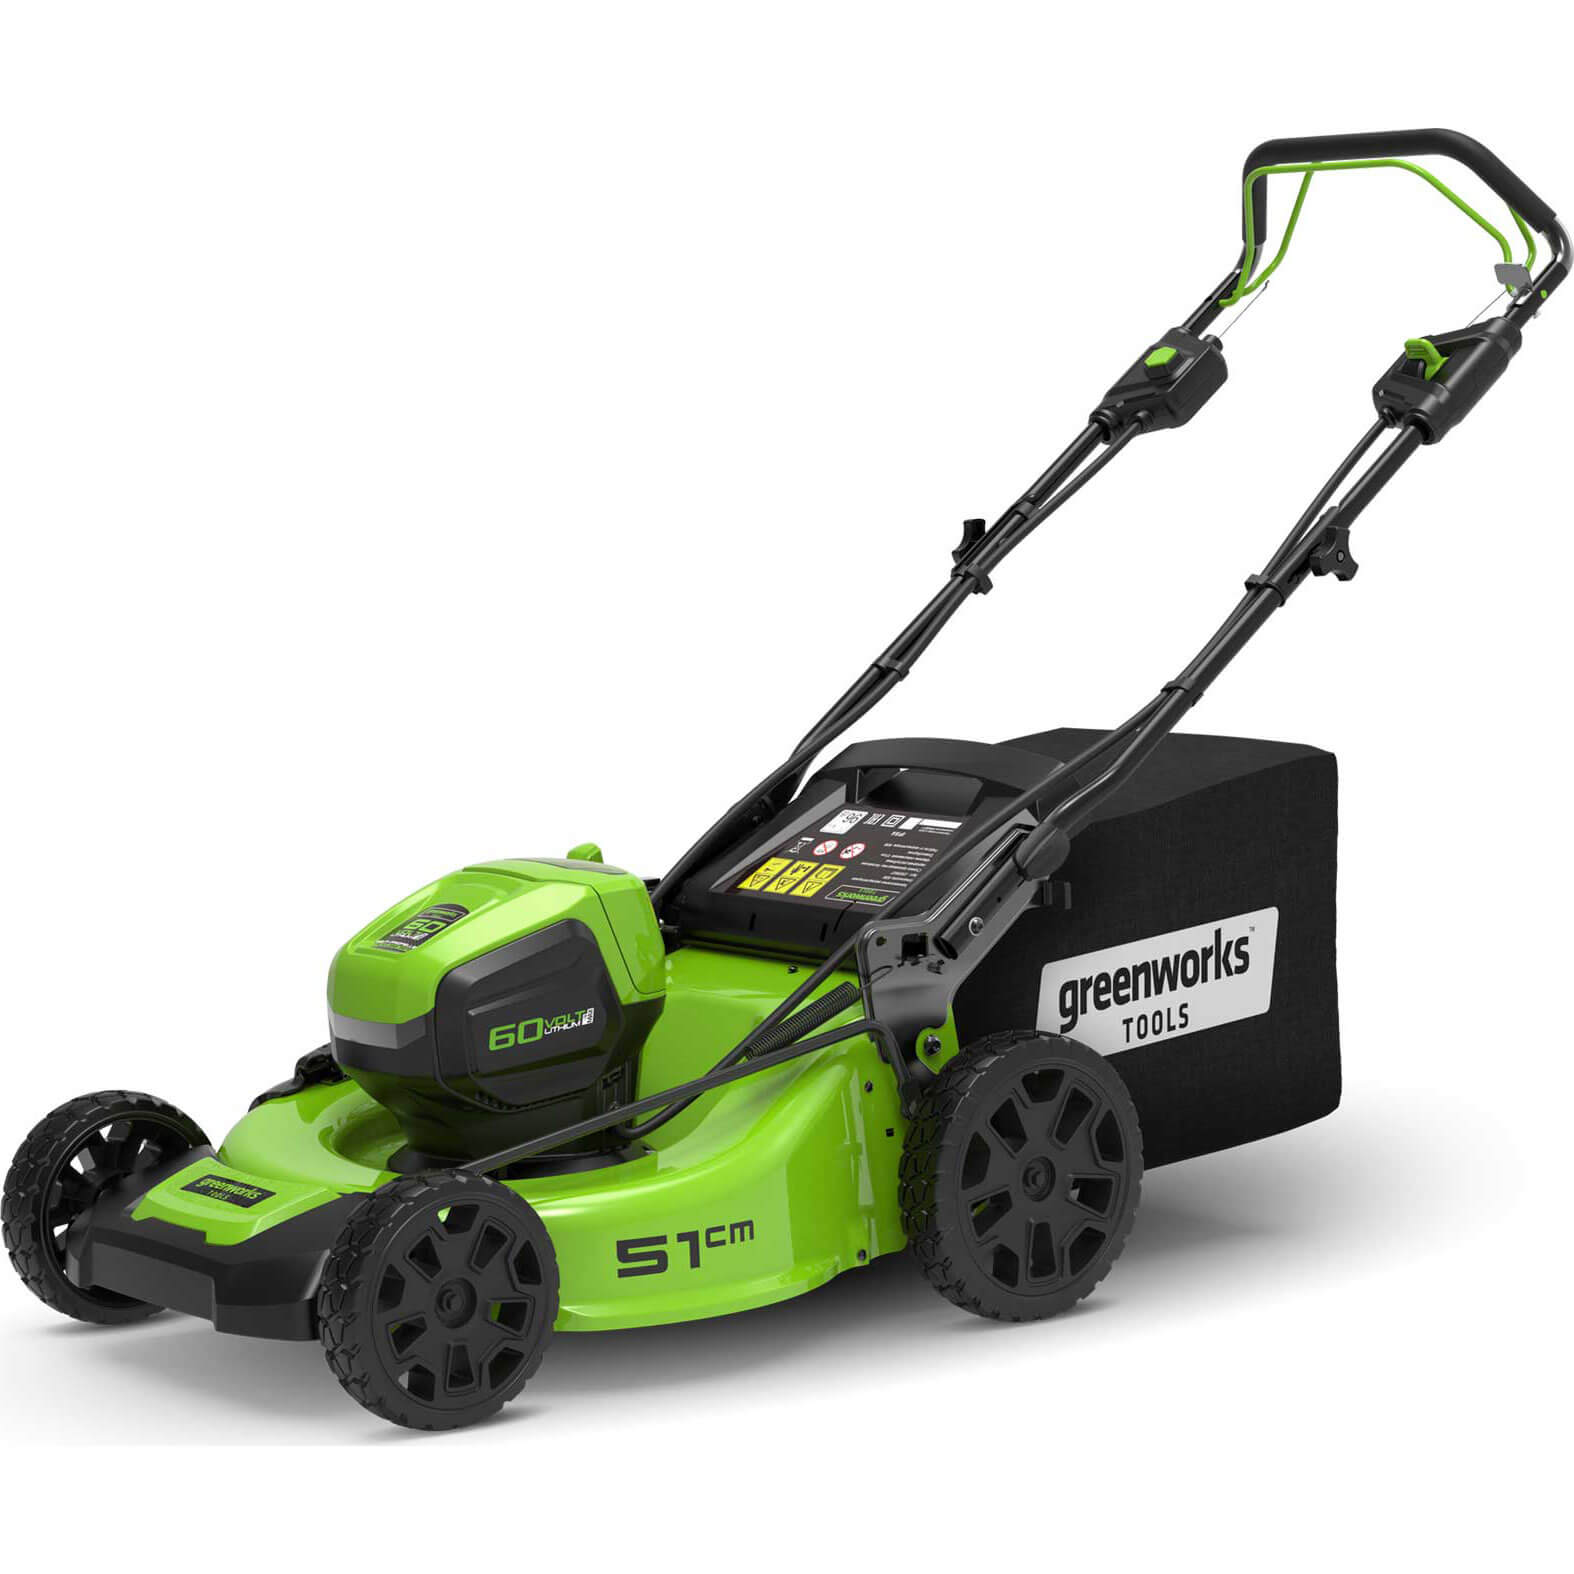 Image of Greenworks GD60LM51 60v Cordless Brushless Self Propelled Lawnmower 510mm No Batteries No Charger